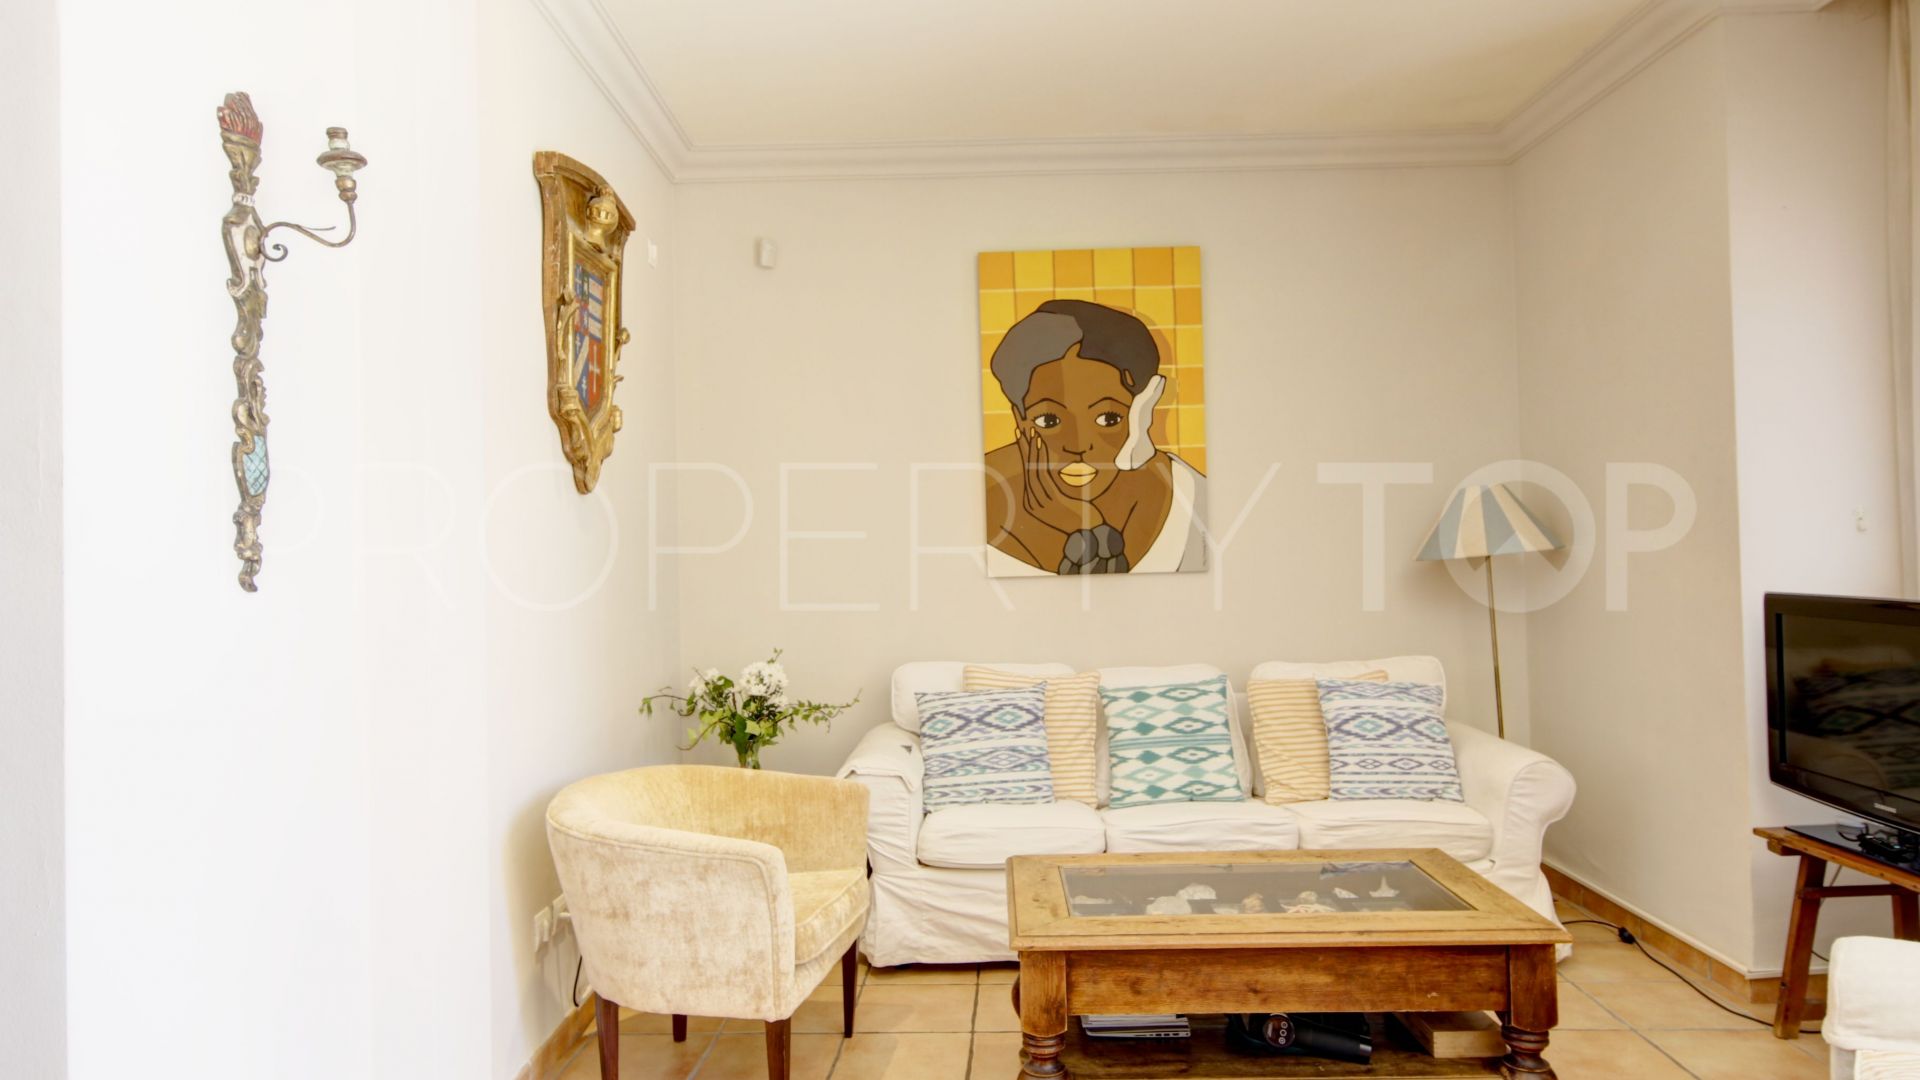 For sale apartment in Paraiso Barronal with 3 bedrooms